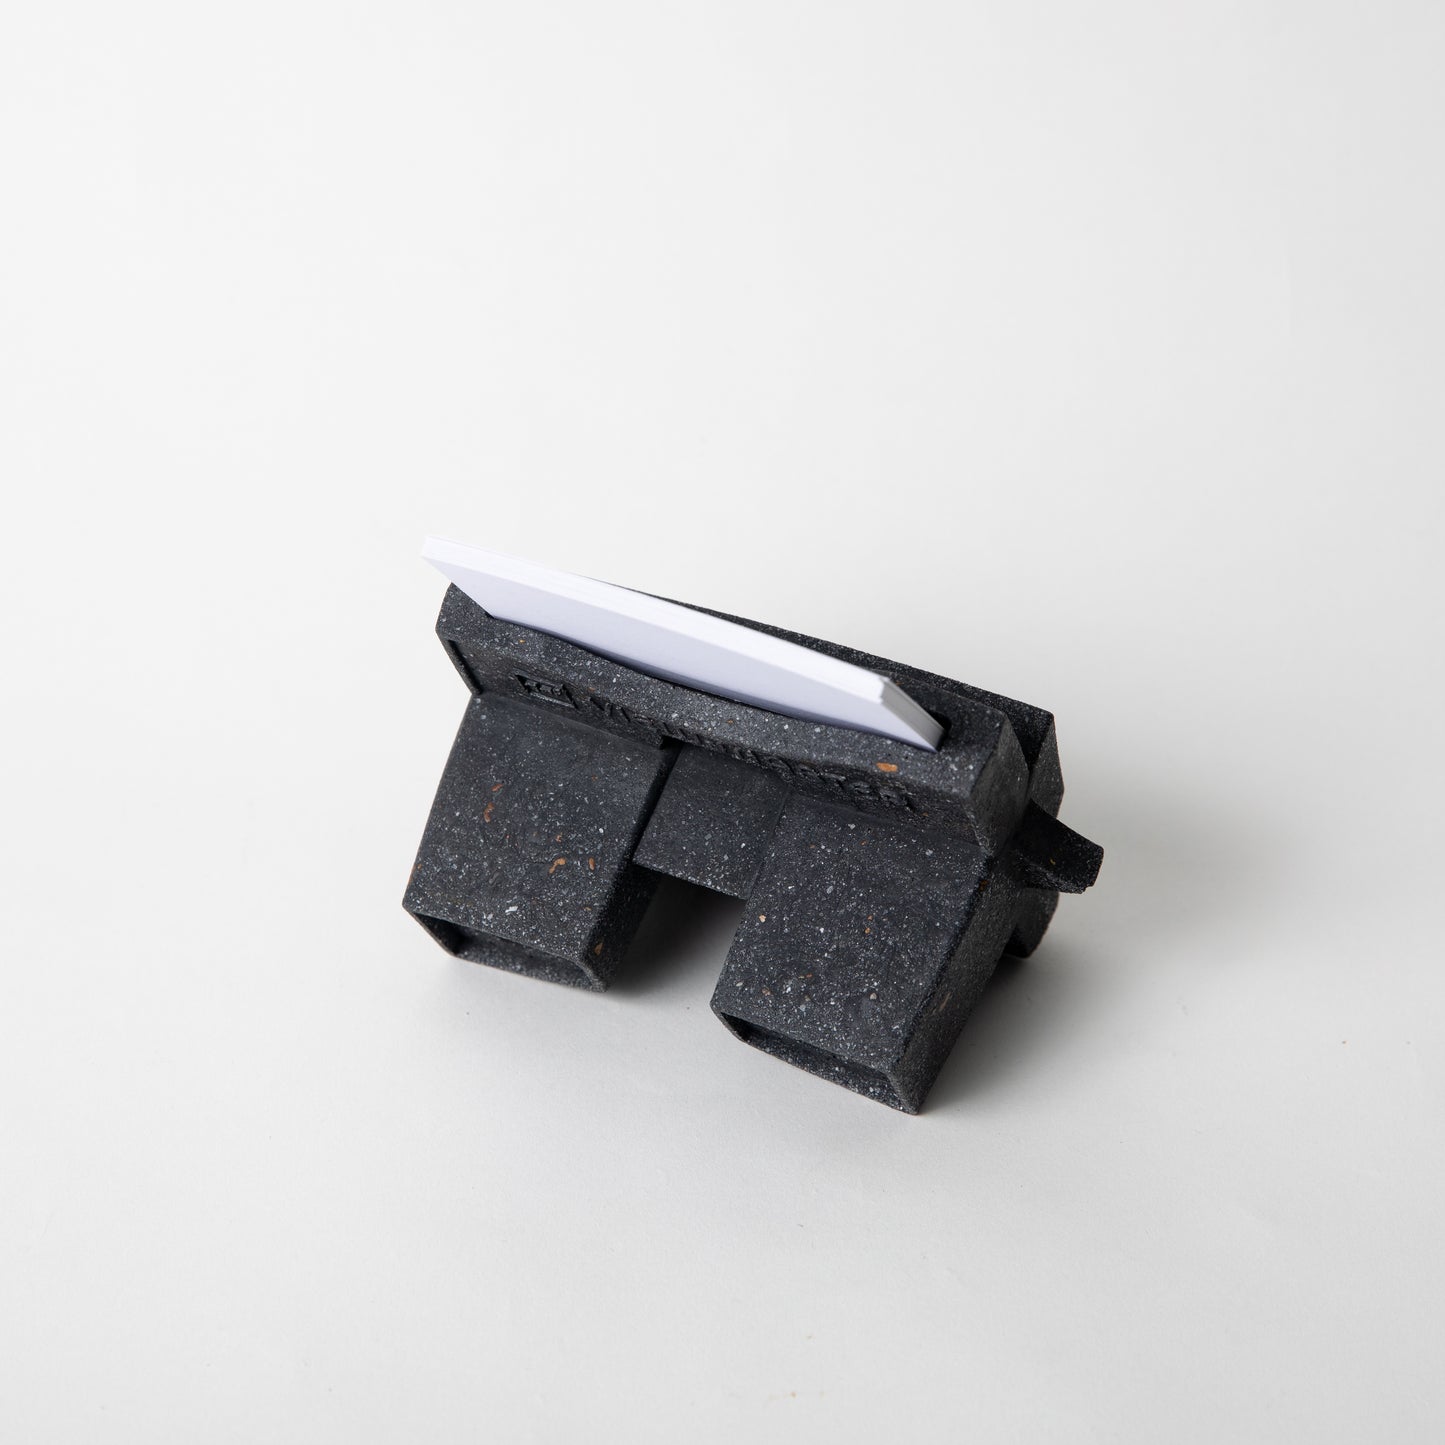 The Retro Business Card Holder in Black Terrazzo w/ blank business cards placed inside.